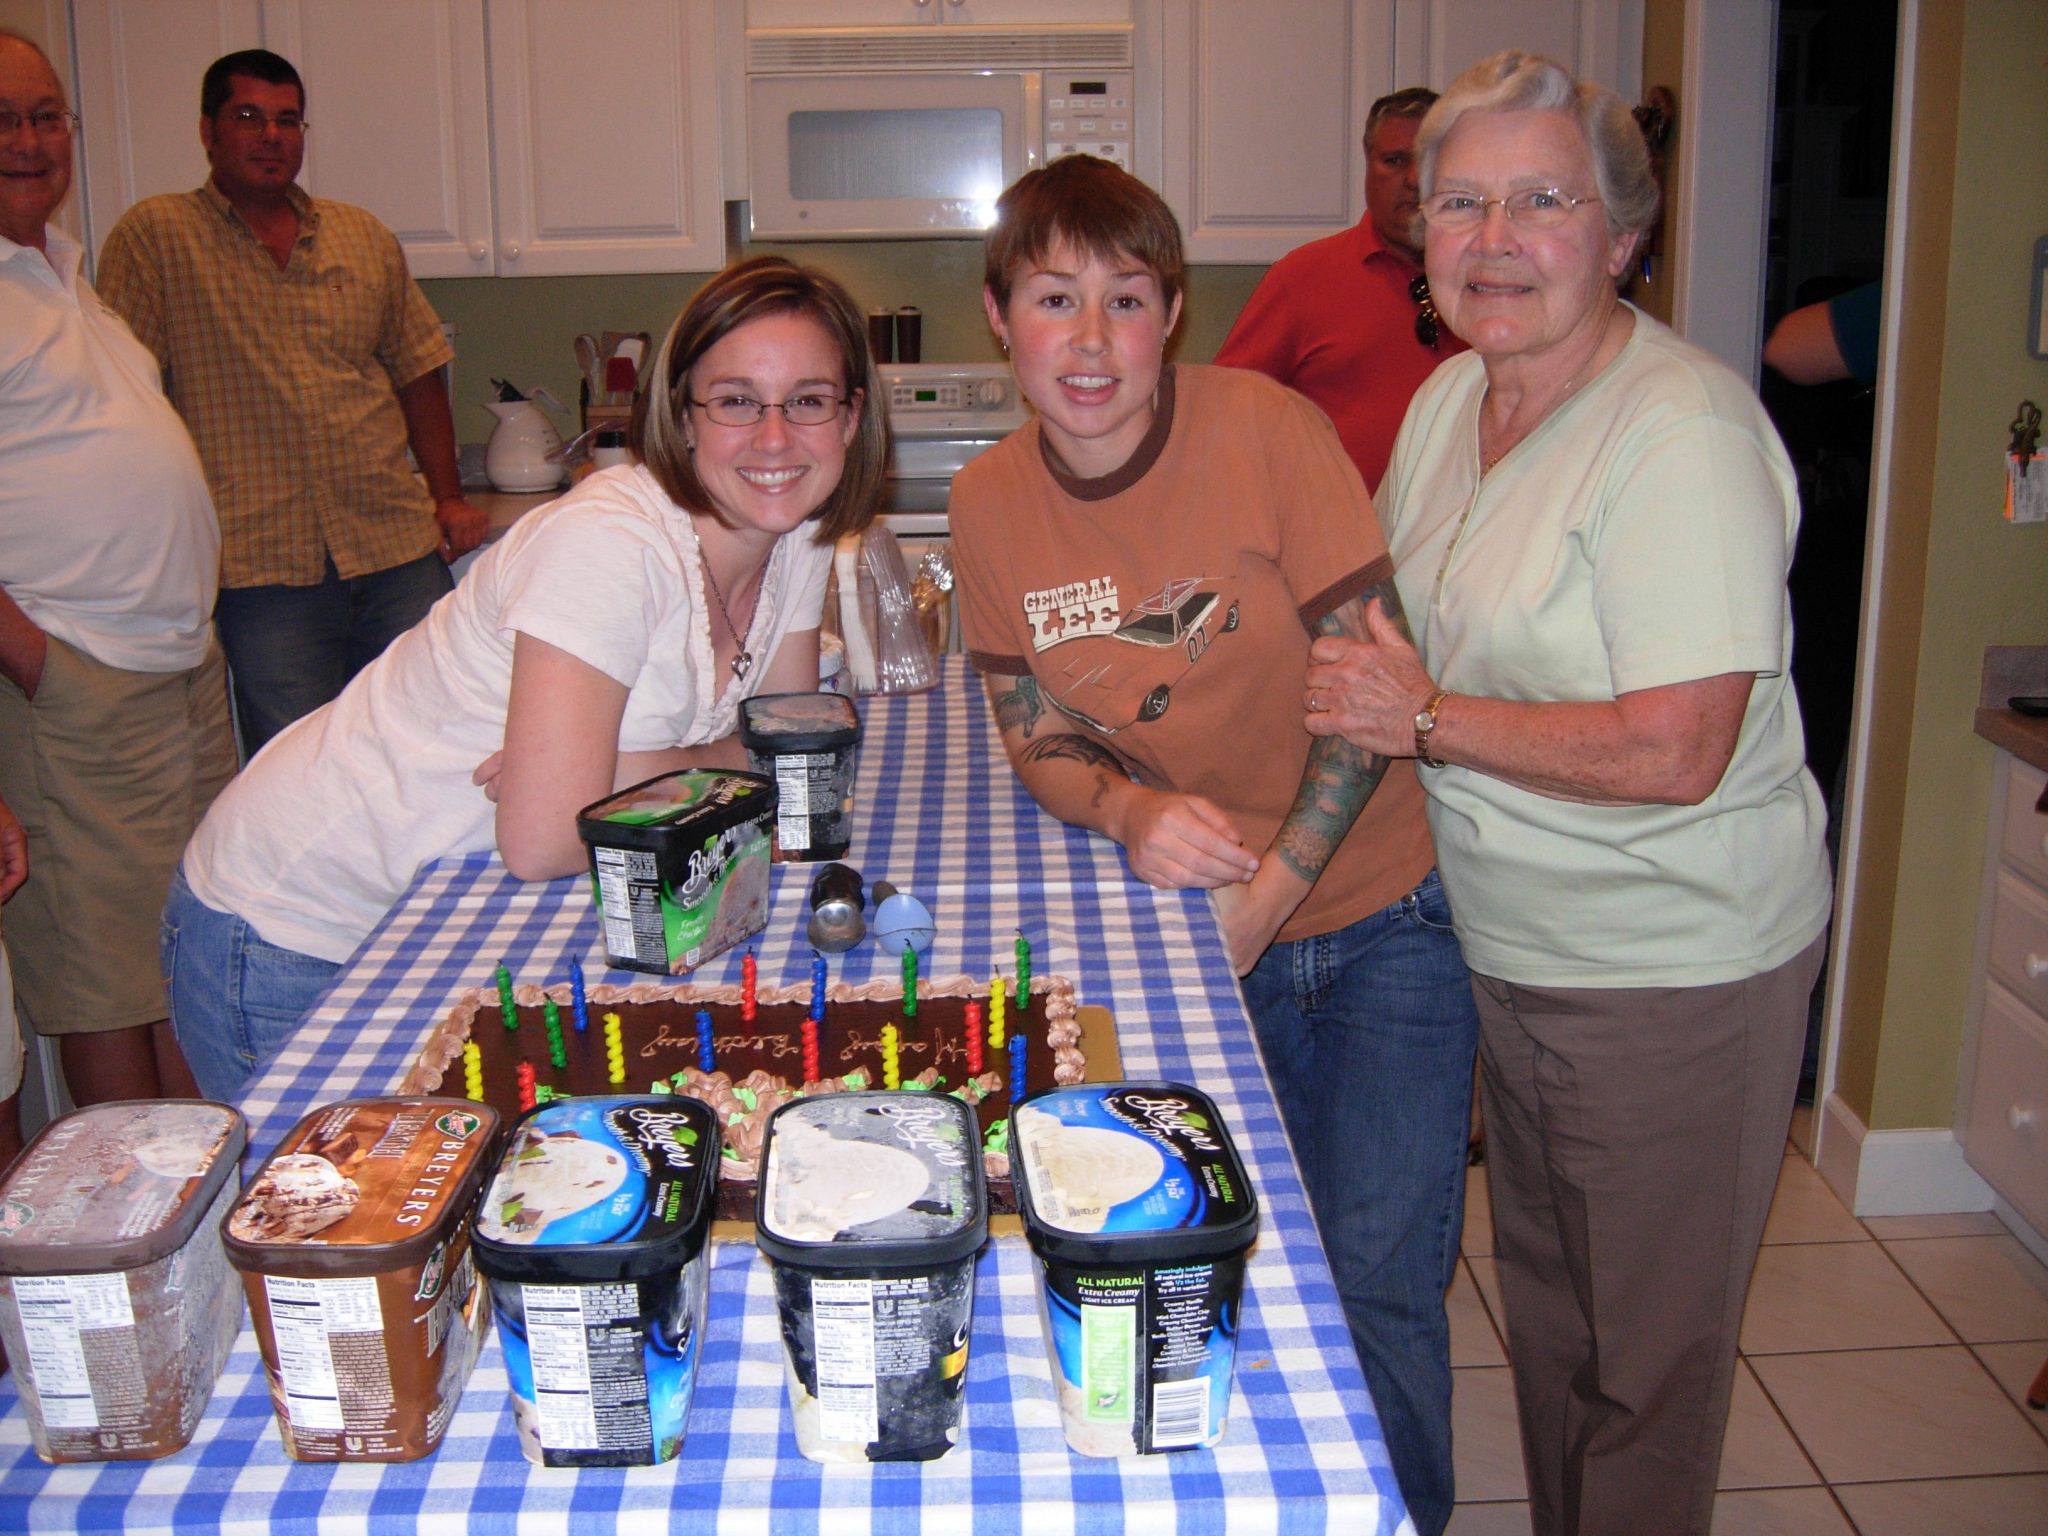 Grandma celebrating her 80th birthday, along with her granddaughters, Carrie and Kelly.